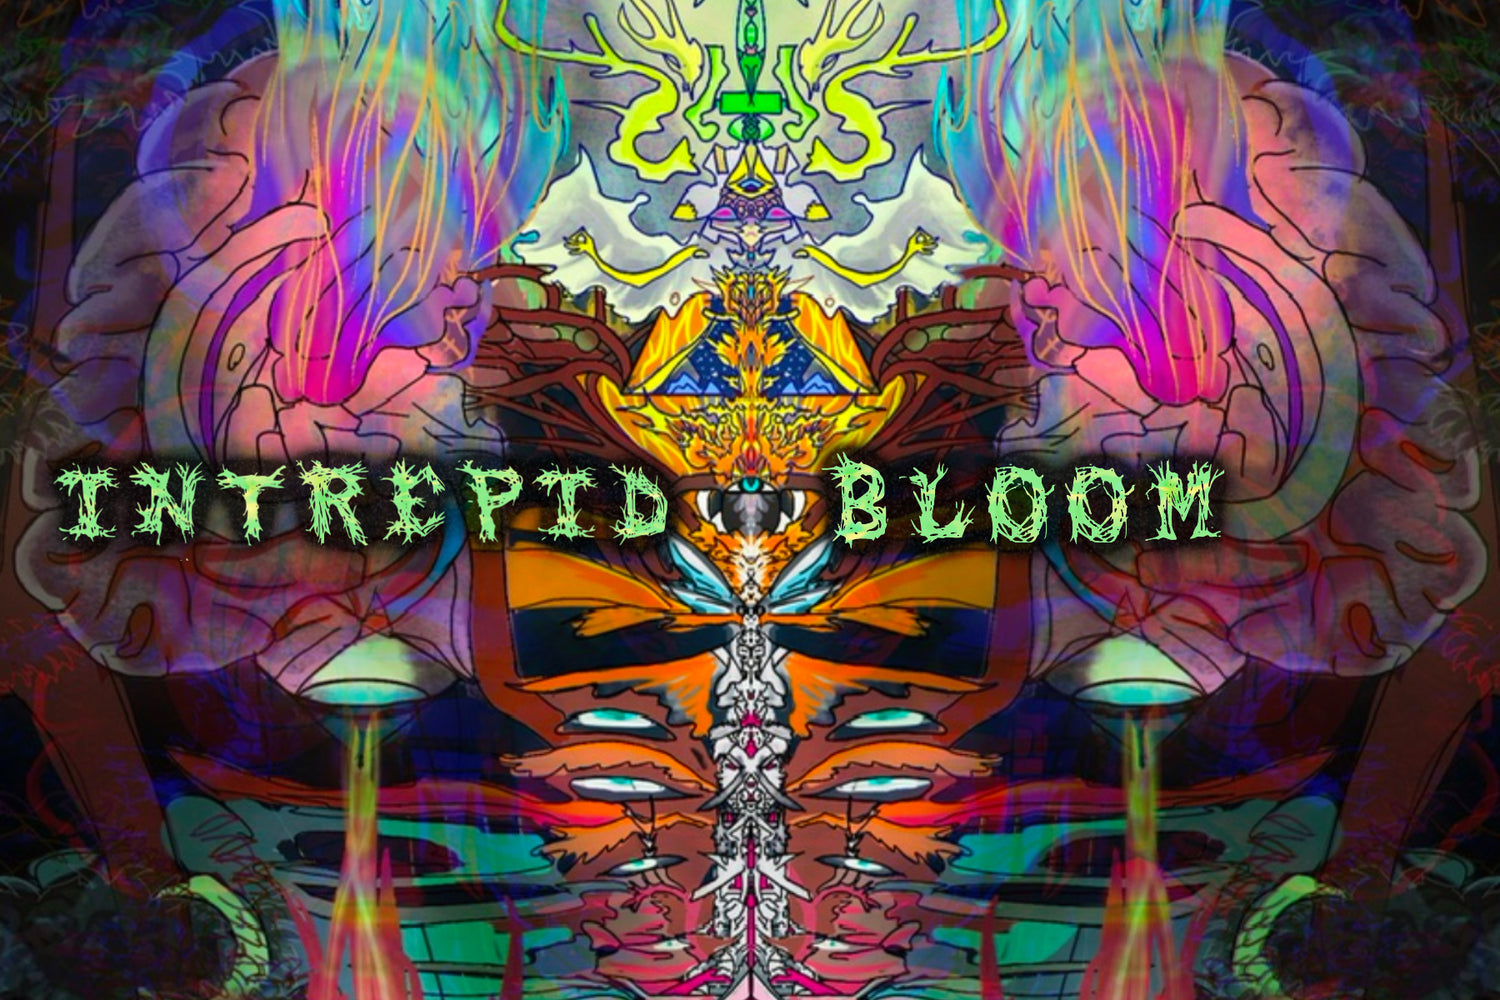 Intrepid Bloom, Missing Link Album cover Mixed by Ulrich Wild, released by WURMgroup, Stoner rock, rock, psychedelic rock, singles dark horse, black cats, the roads, above the storm, no turning back